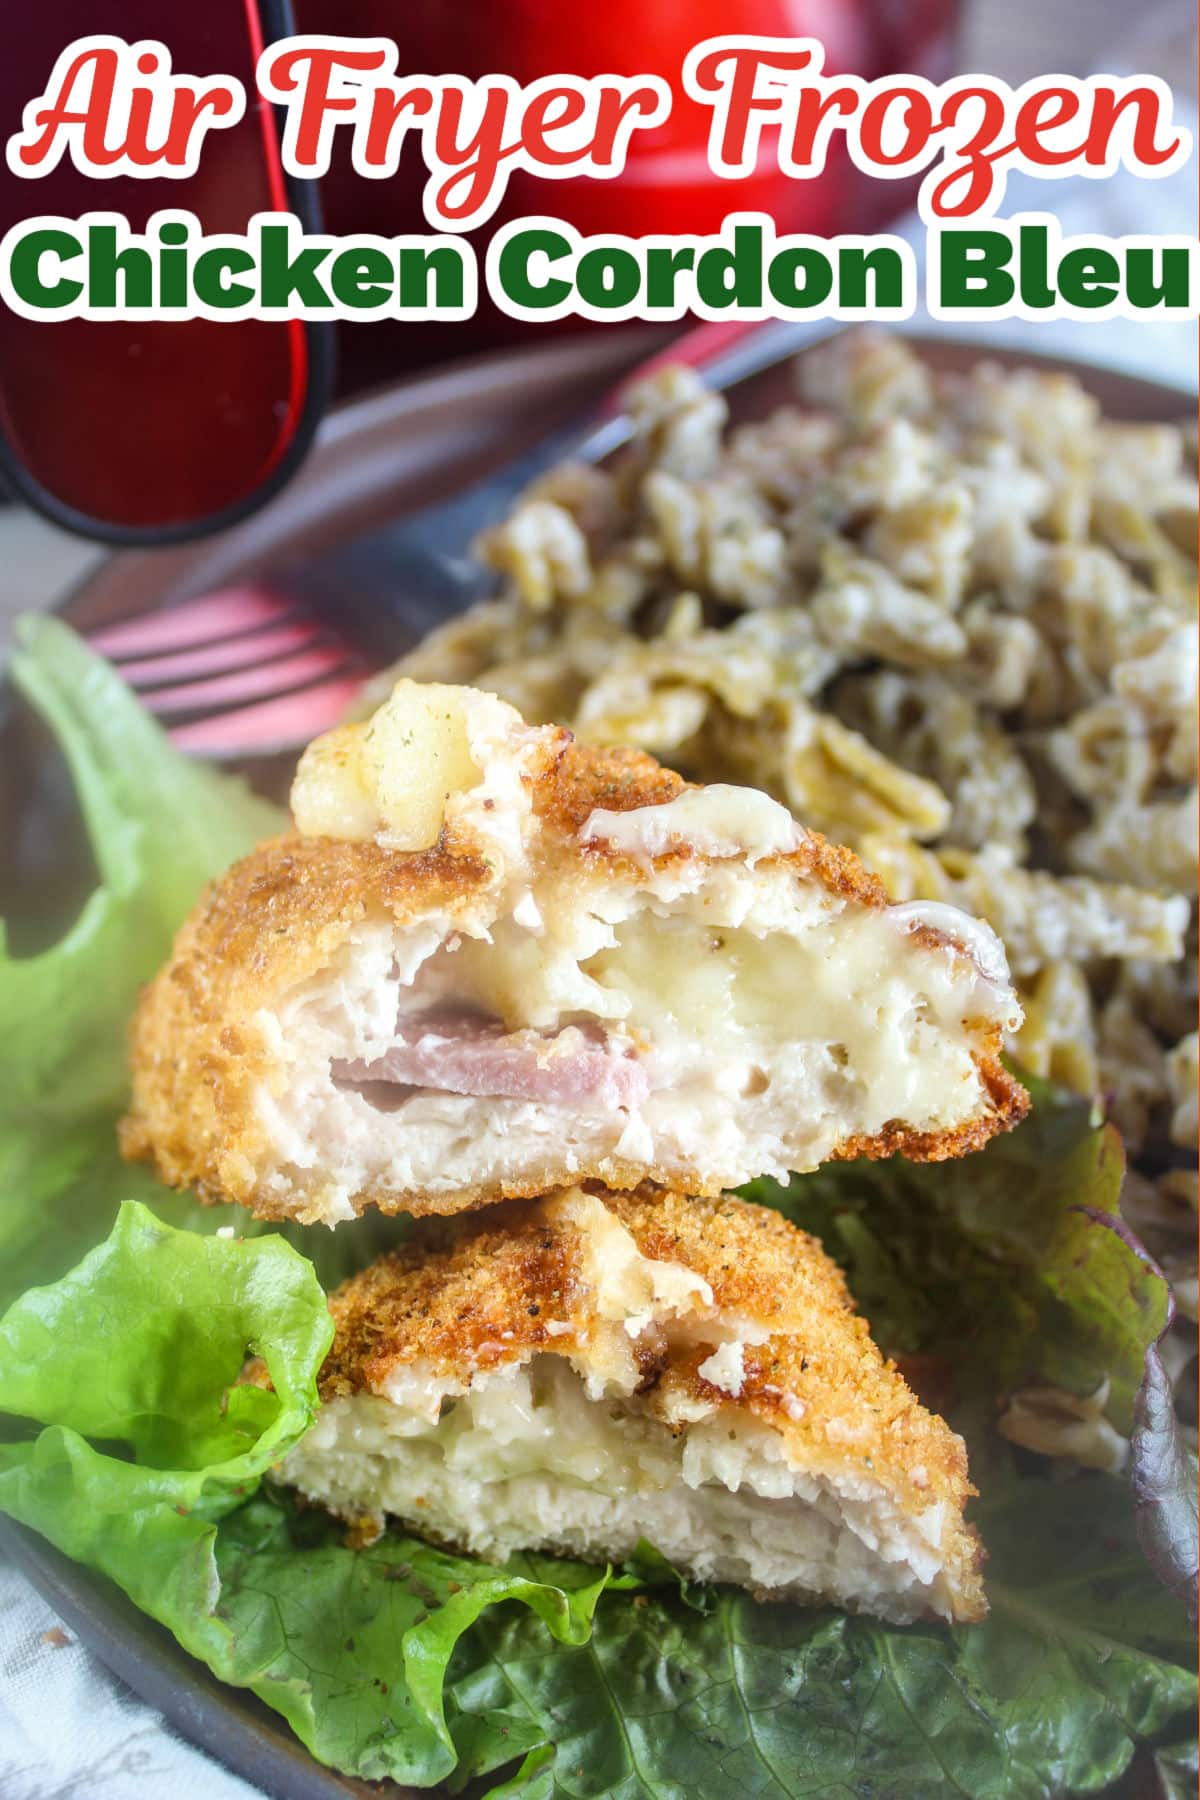 Frozen Chicken Cordon Bleu in the air fryer is a super simple, 20 minute dinner! Grab it out of the freezer and pop it in the air fryer! This is a great way to enjoy that cheesy stuffed chicken goodness in no time! via @foodhussy